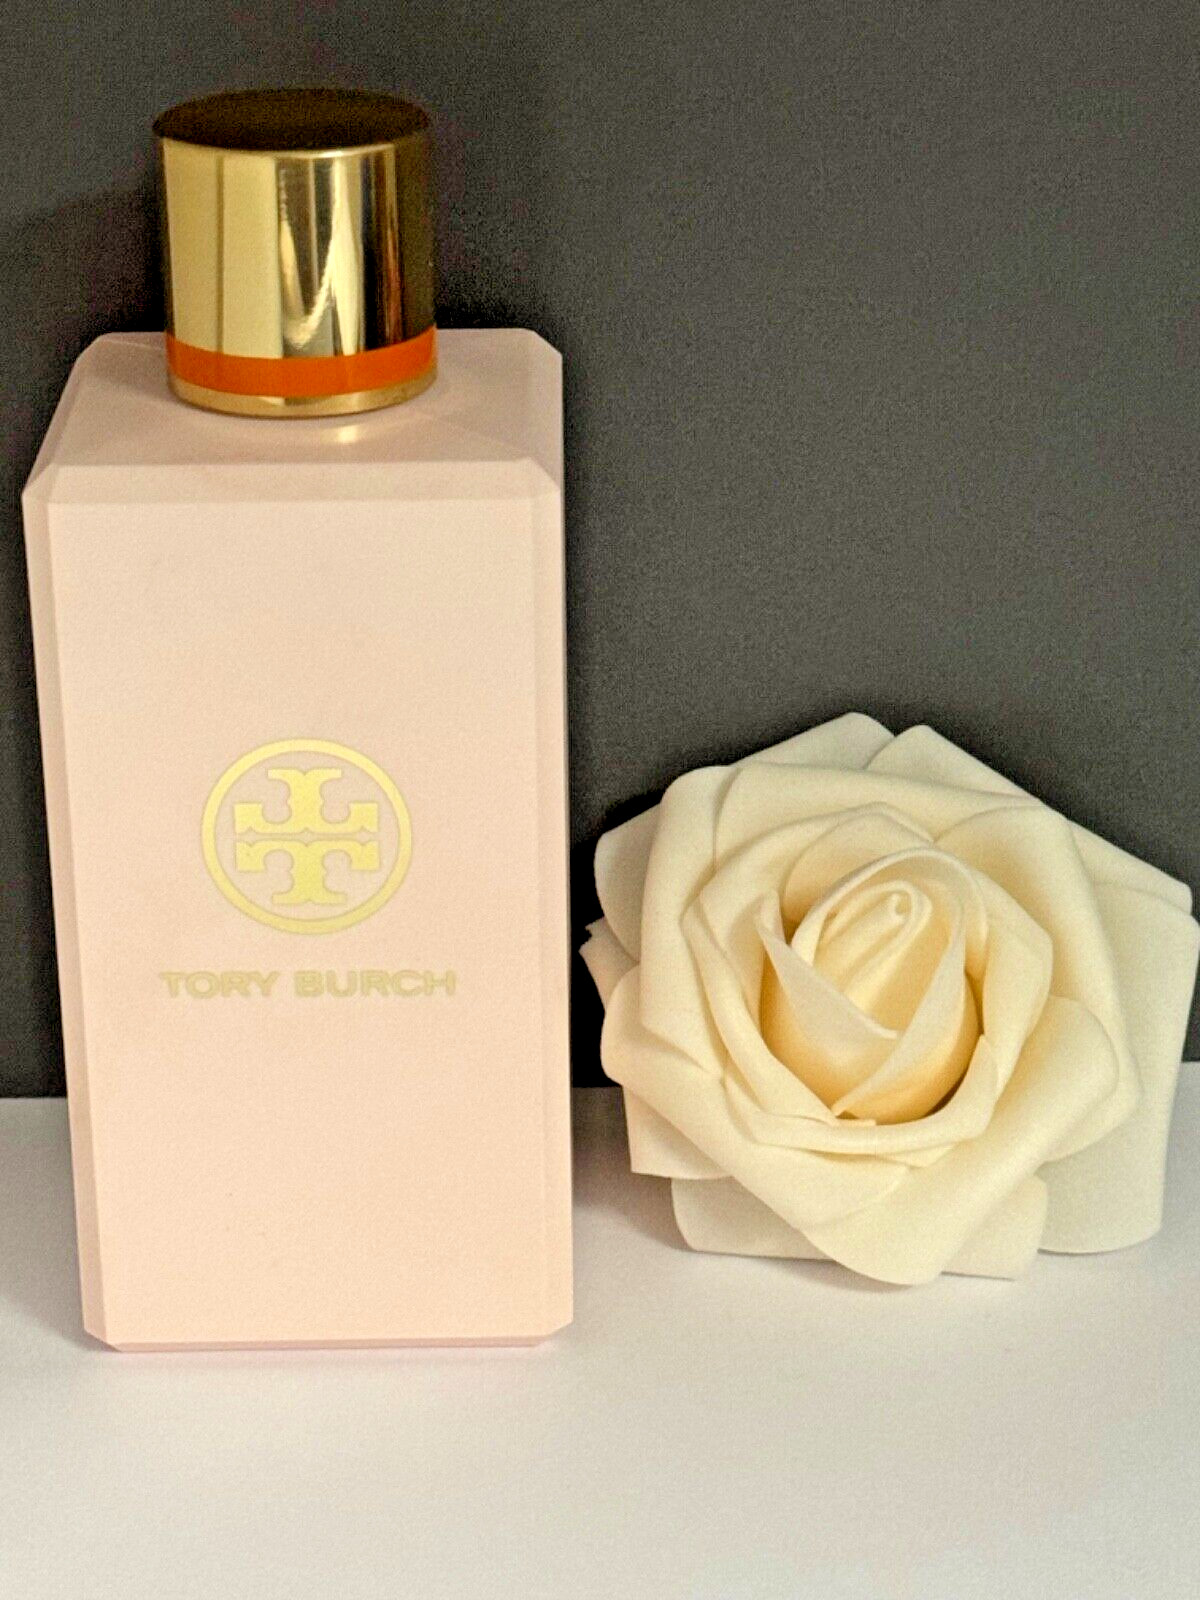 Tory Burch Body Lotion 7.6 Oz Size Read Details